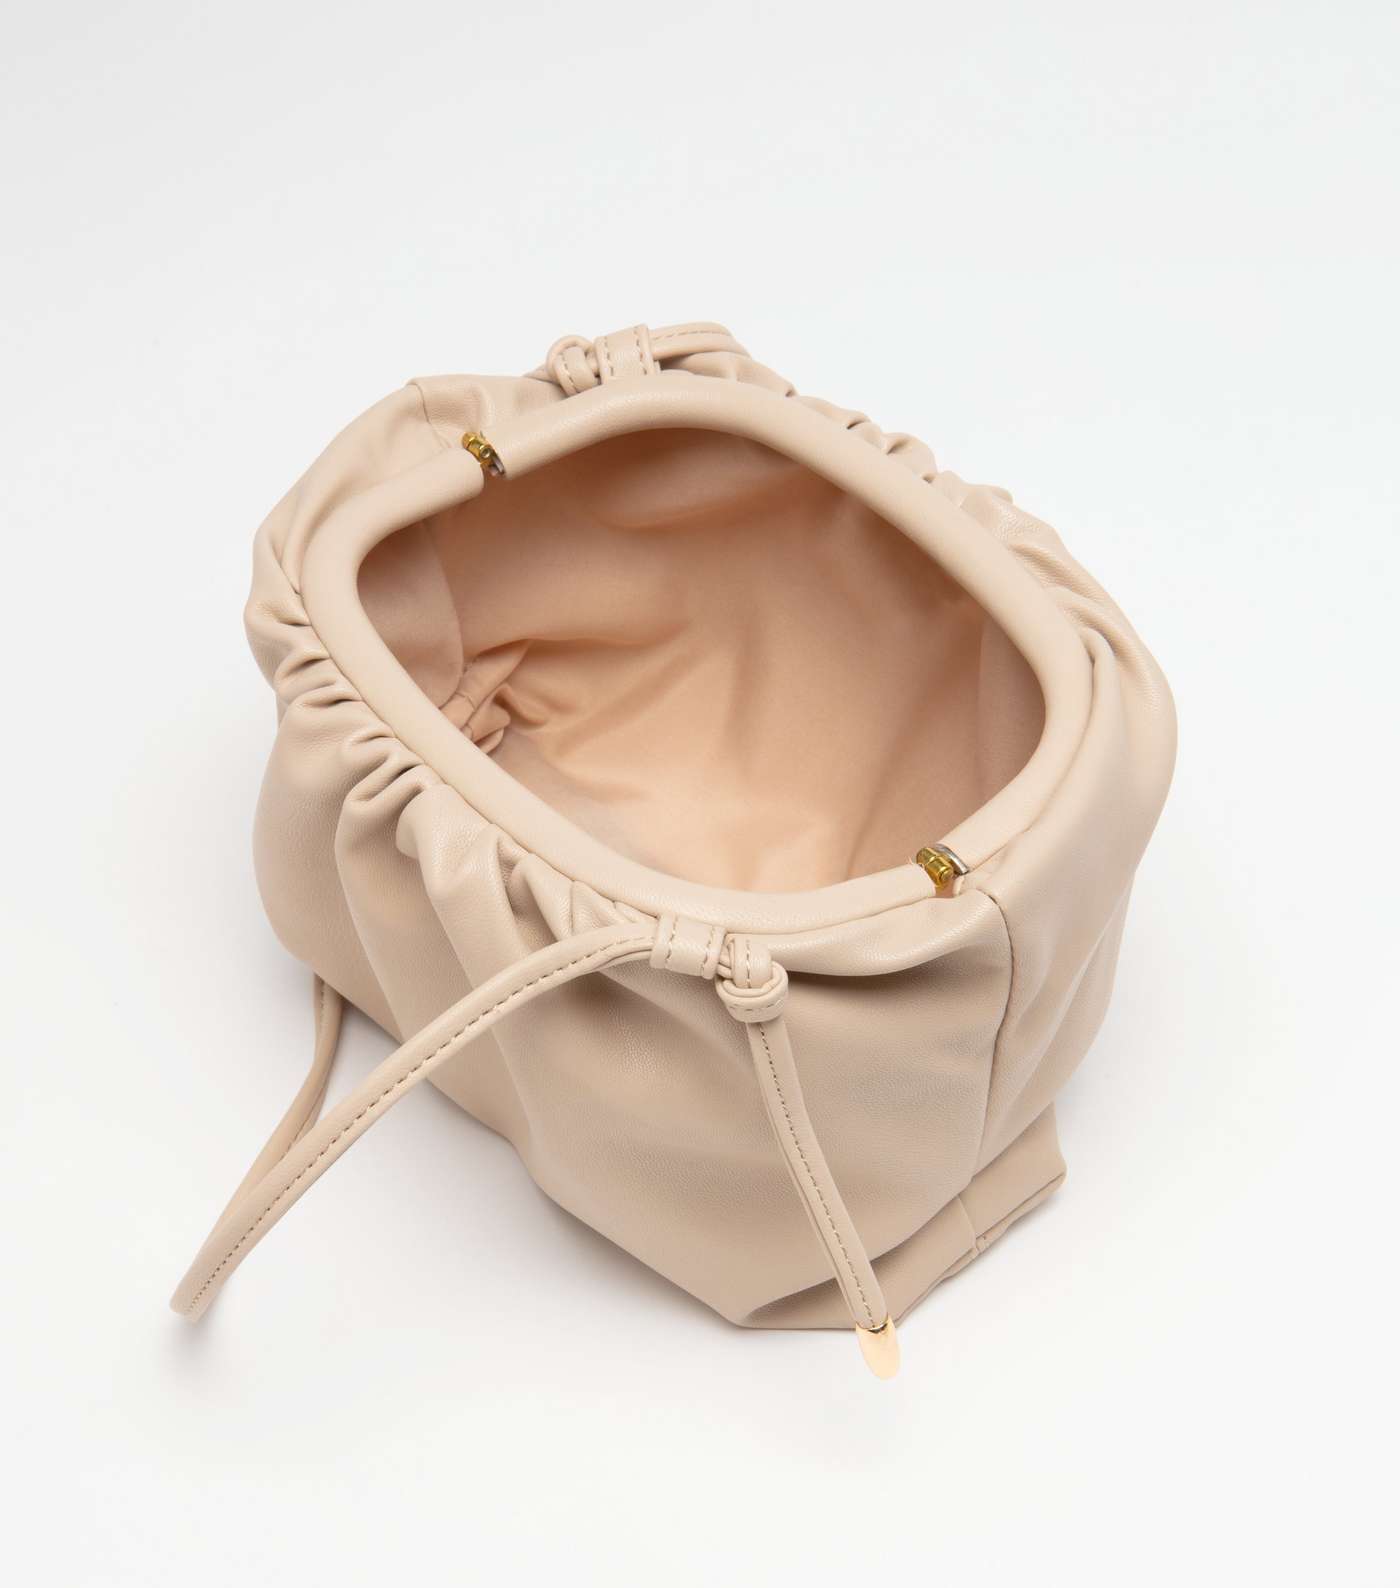 Off White Leather-Look Pouch Bag Image 2